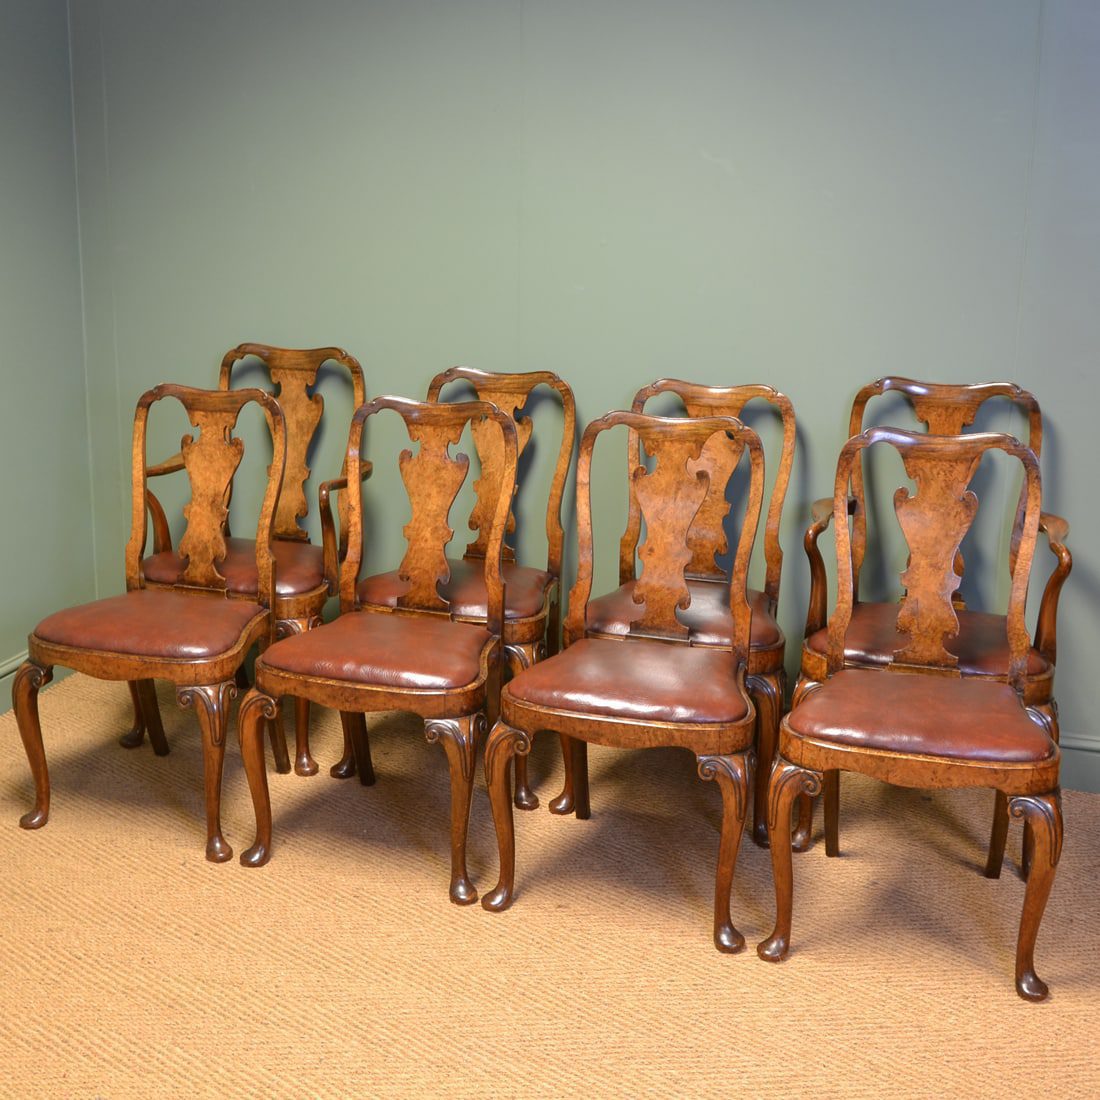 ANTIQUE EDWARDIAN CHAIRS